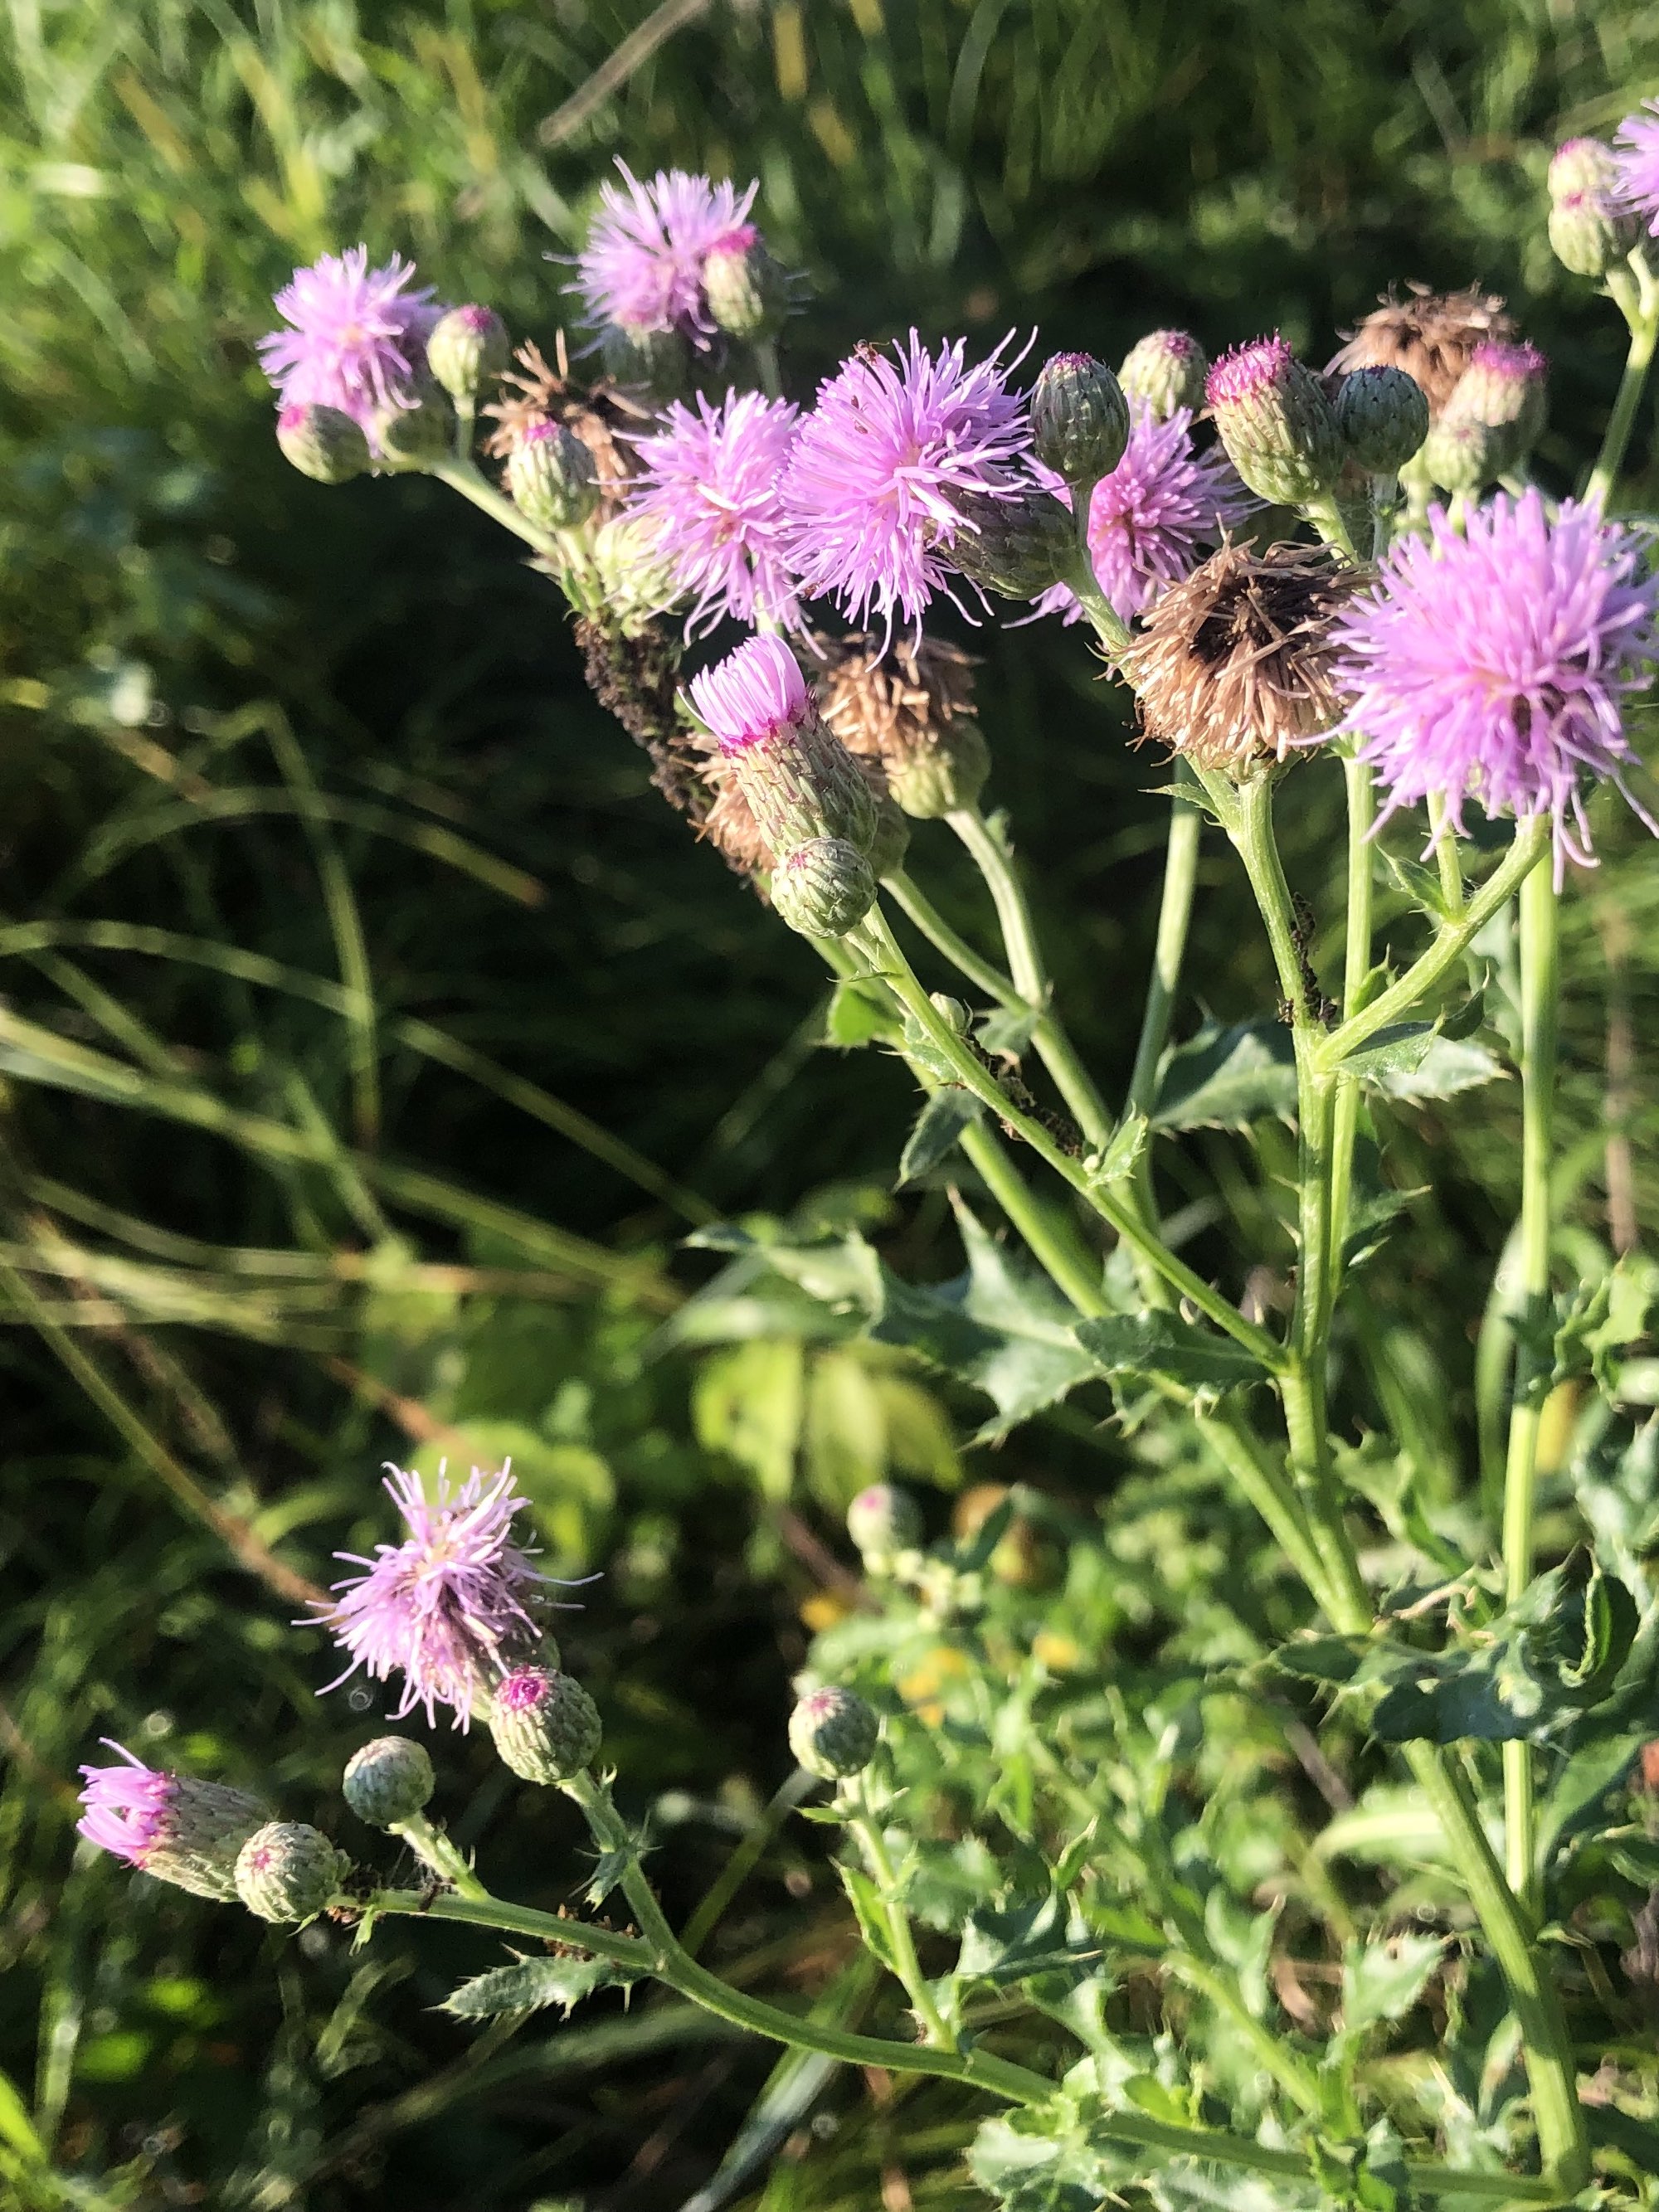 Canada Thistle on the shore of Lake Wingra in Wingra Park in Madison, Wisconsin on August 17, 2022.